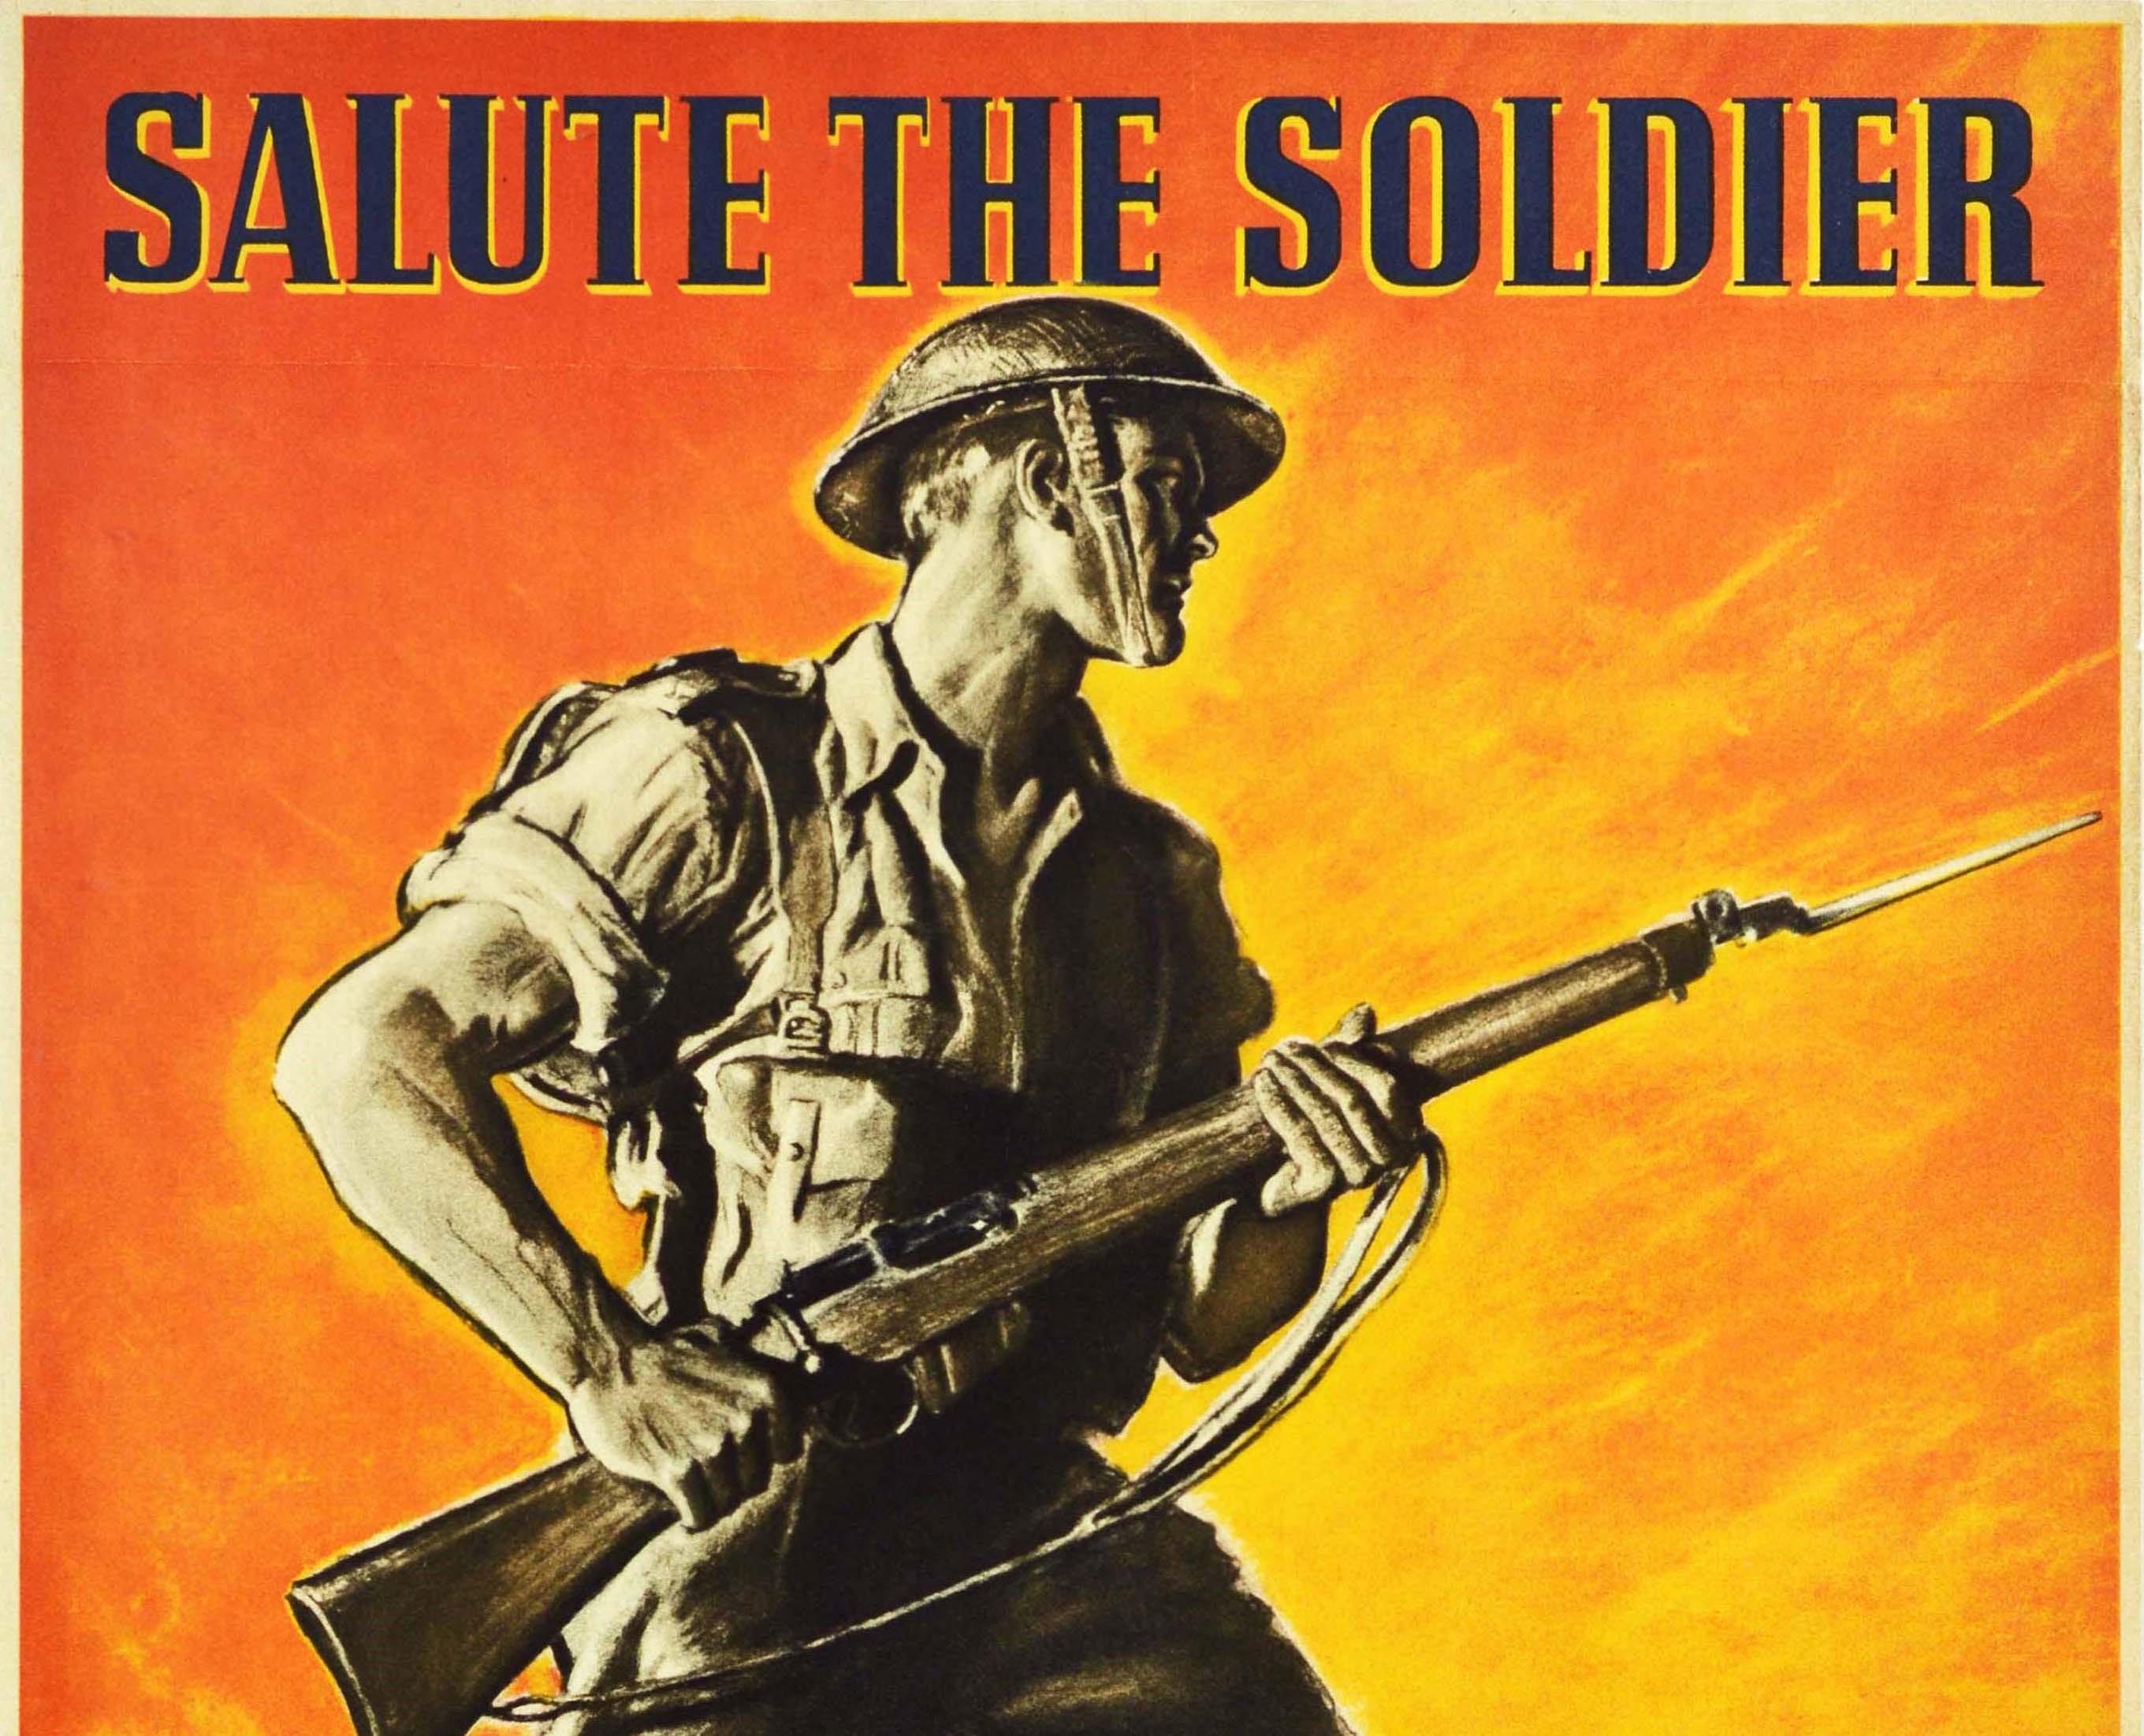 Original vintage World War Two poster - Salute The Soldier The Liberator Save More Lend More - depicting an army soldier in military uniform armed with a gun and stepping forward into battle against a dramatic orange and yellow shaded background,